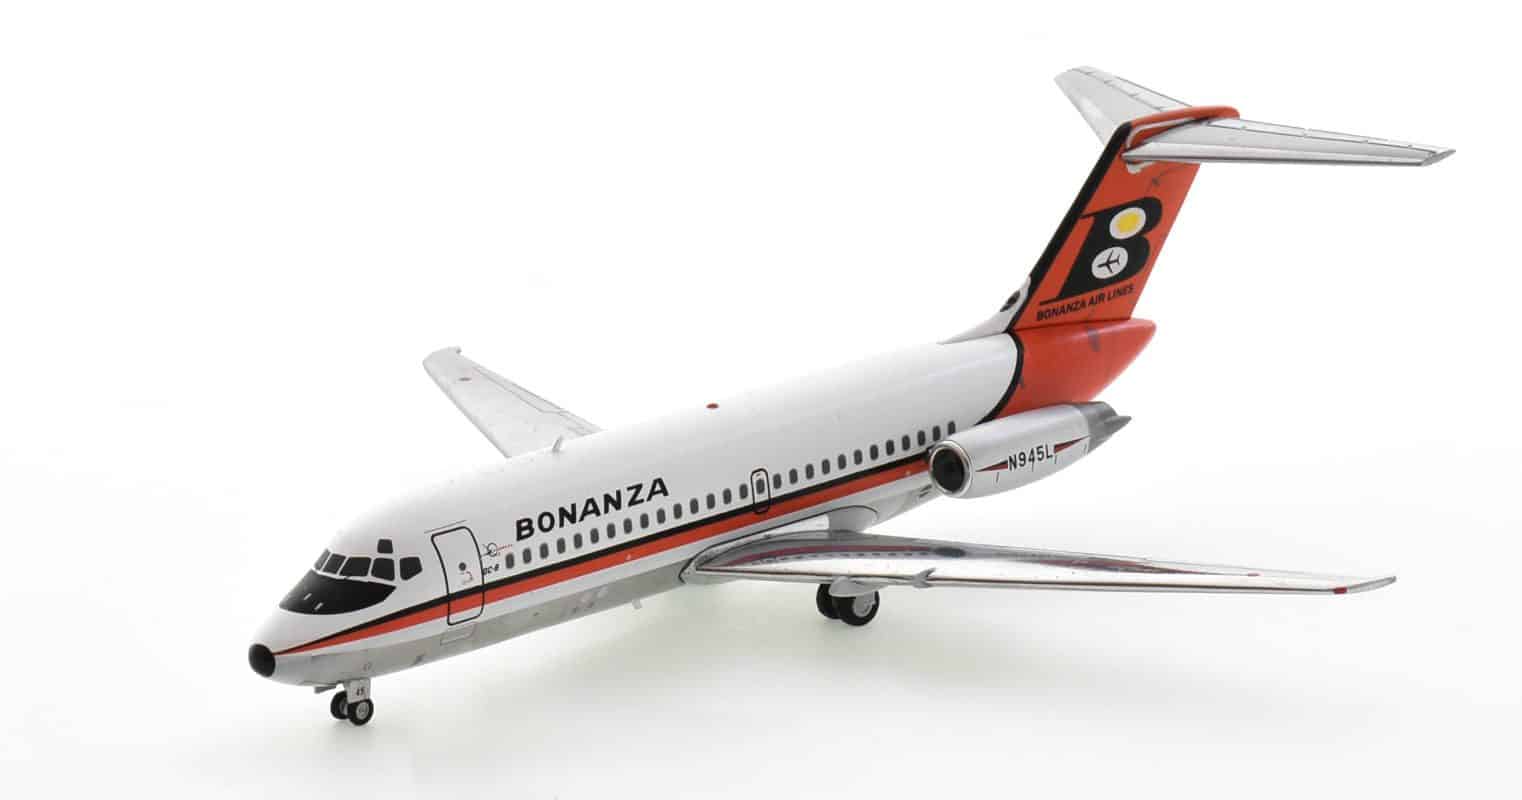 Front port side view of Gemini Jets G2BZA480 - 1/200 scale diecast model of the McDonnell Douglas DC-9-11 registration N945L in Bonanza Airlines livery.